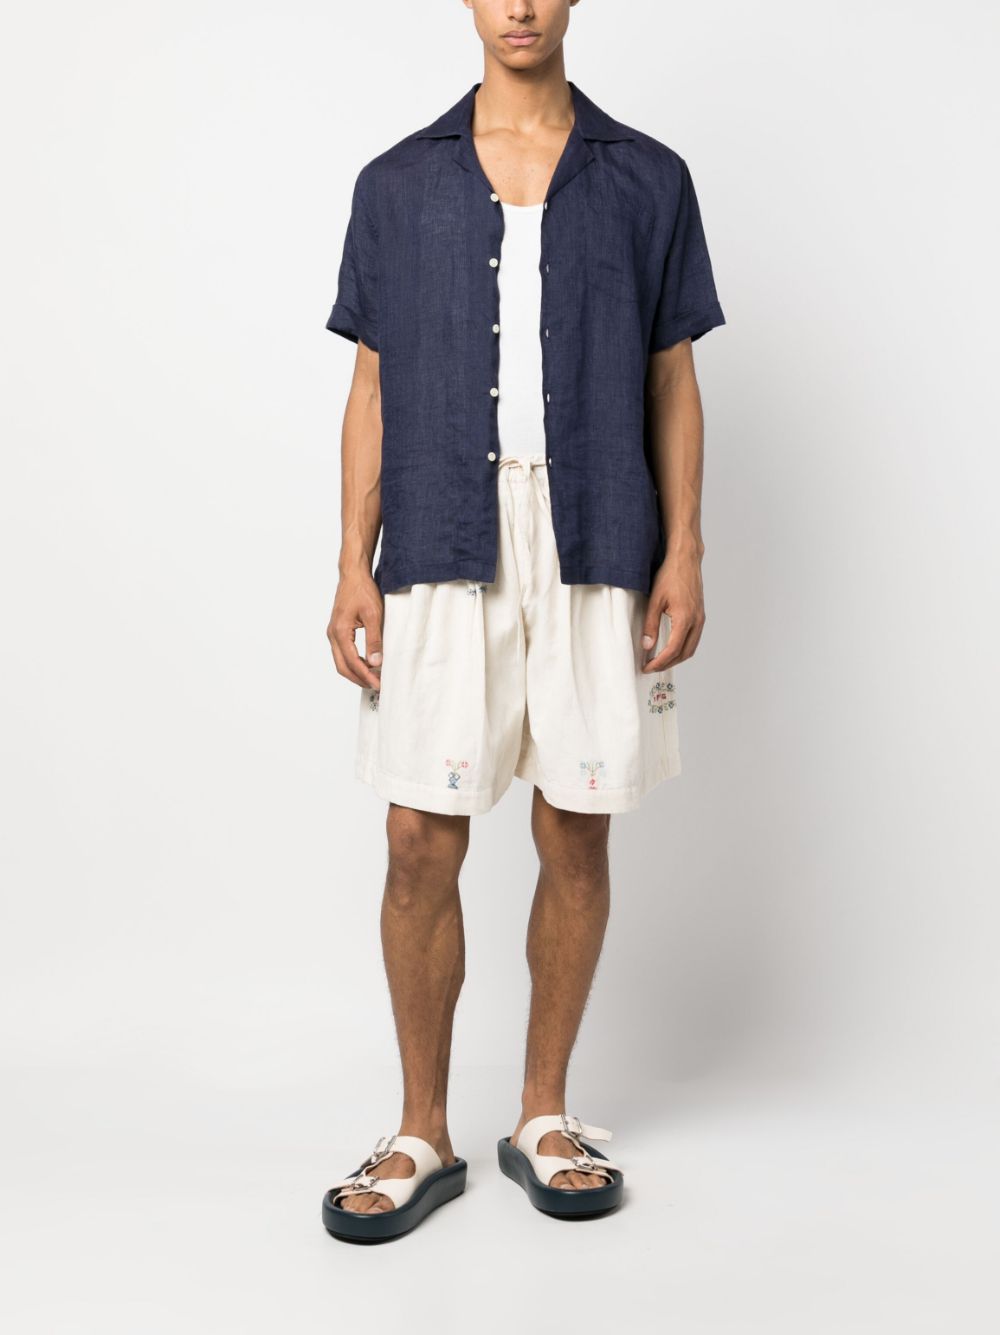 STORY mfg. embroidered-design drop-crotch shorts - Beige